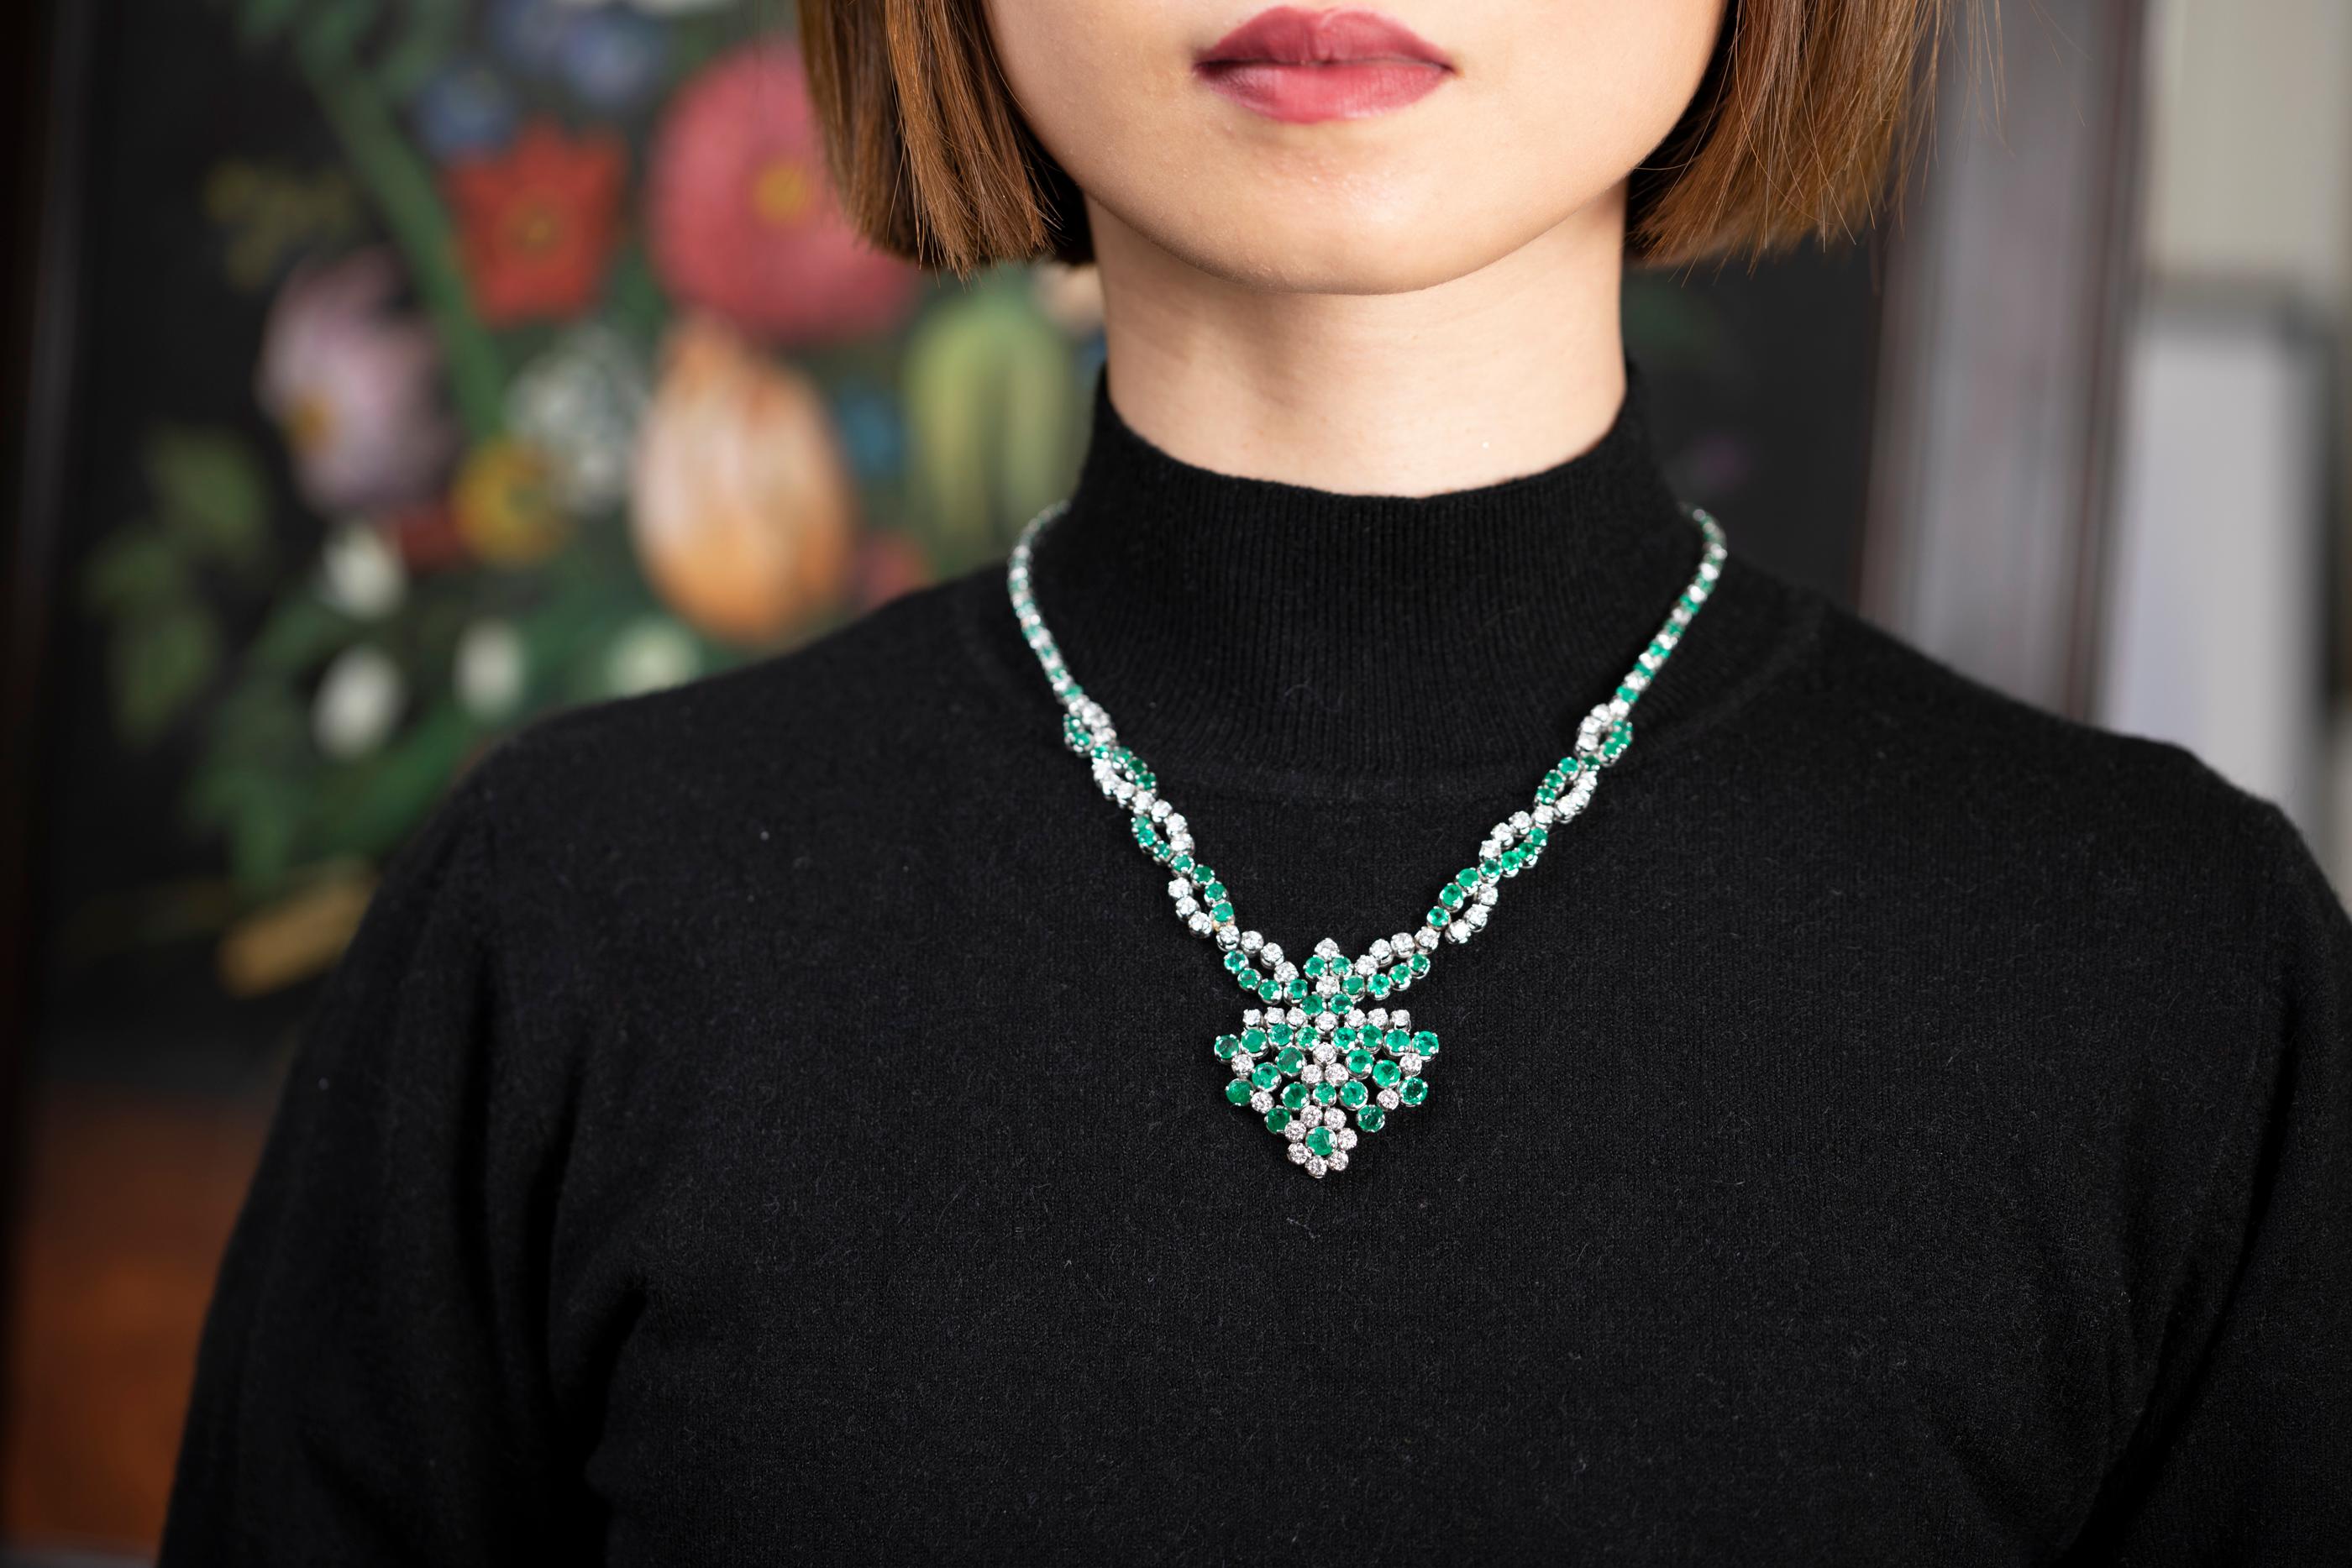 10 Carats Diamonds and 12 Carats Emeralds Necklace   

Very beautiful necklace, made in France circa 1980. 
The Design is elegant, the workmanship is quality. 
Made with white gold 18k. Mark for gold 18k (the eagle). 
The round diamonds are good